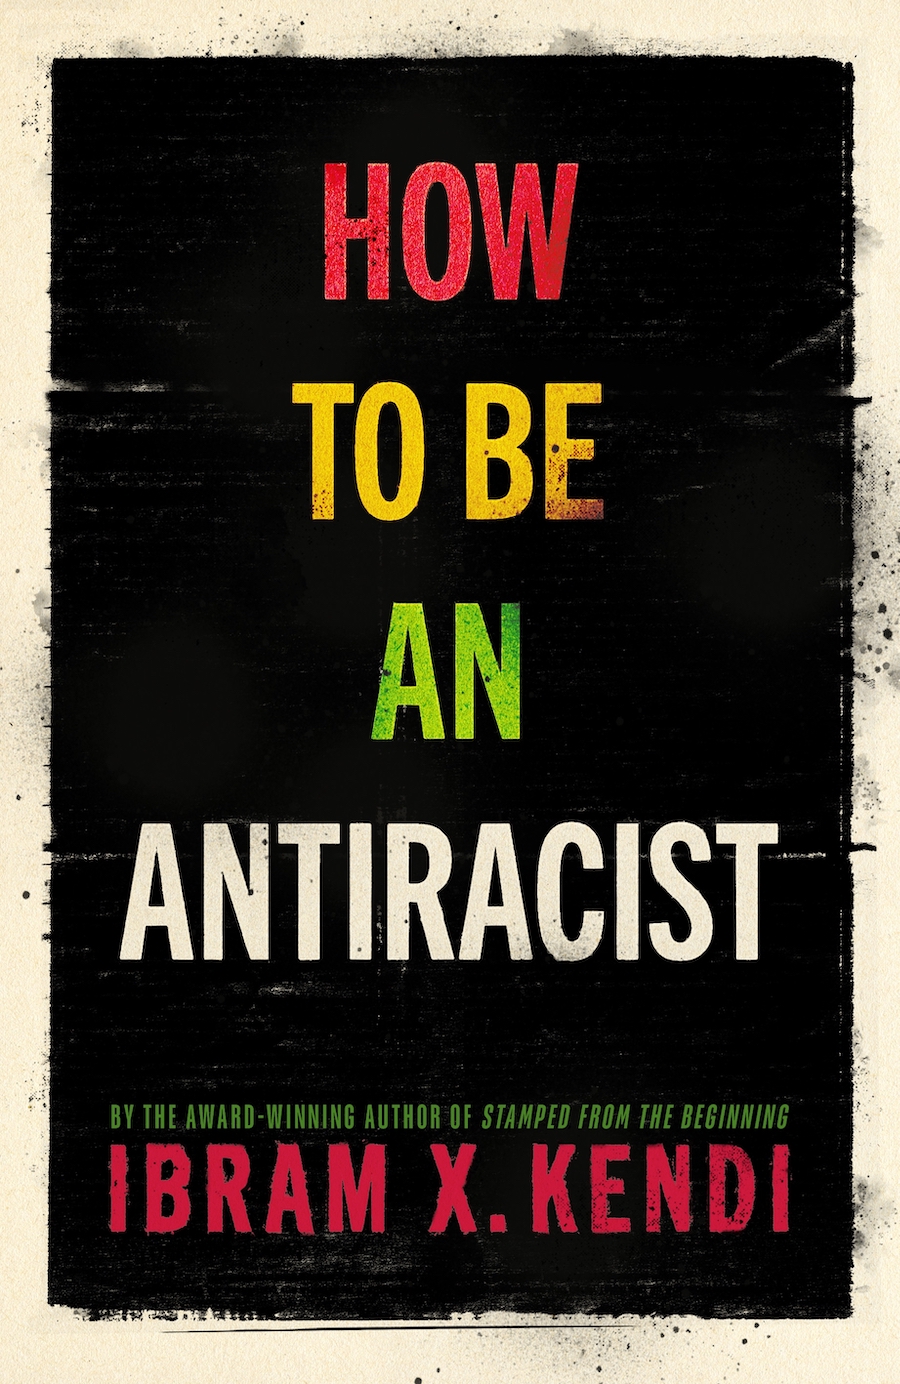 The book cover for How to Be Antiracist